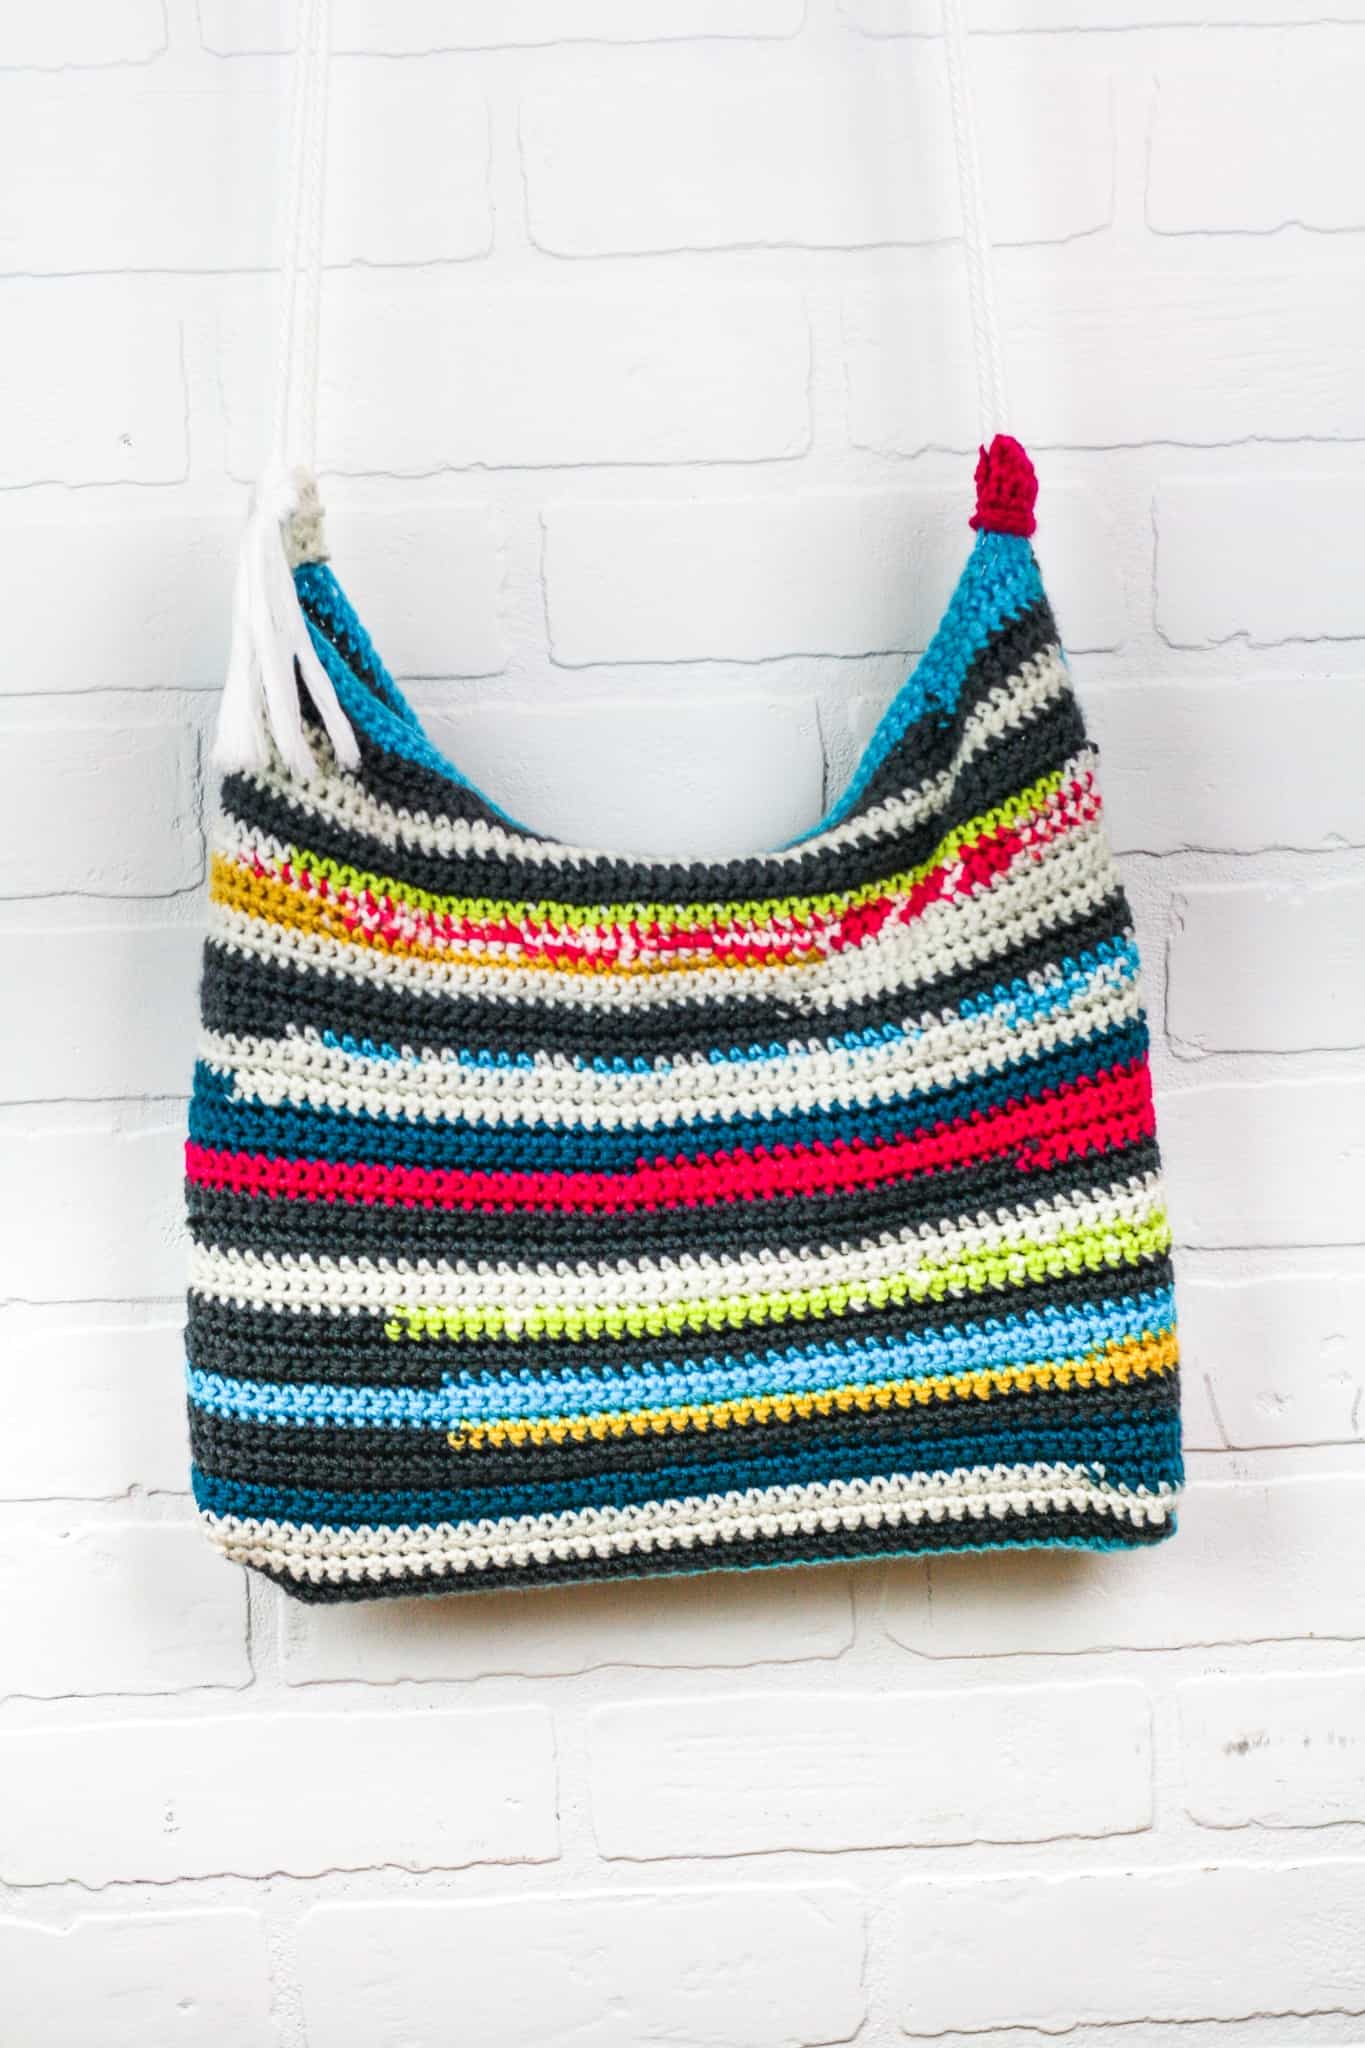 How to make a Flat Bottom Bag from a Crochet Rectangle - Winding Road